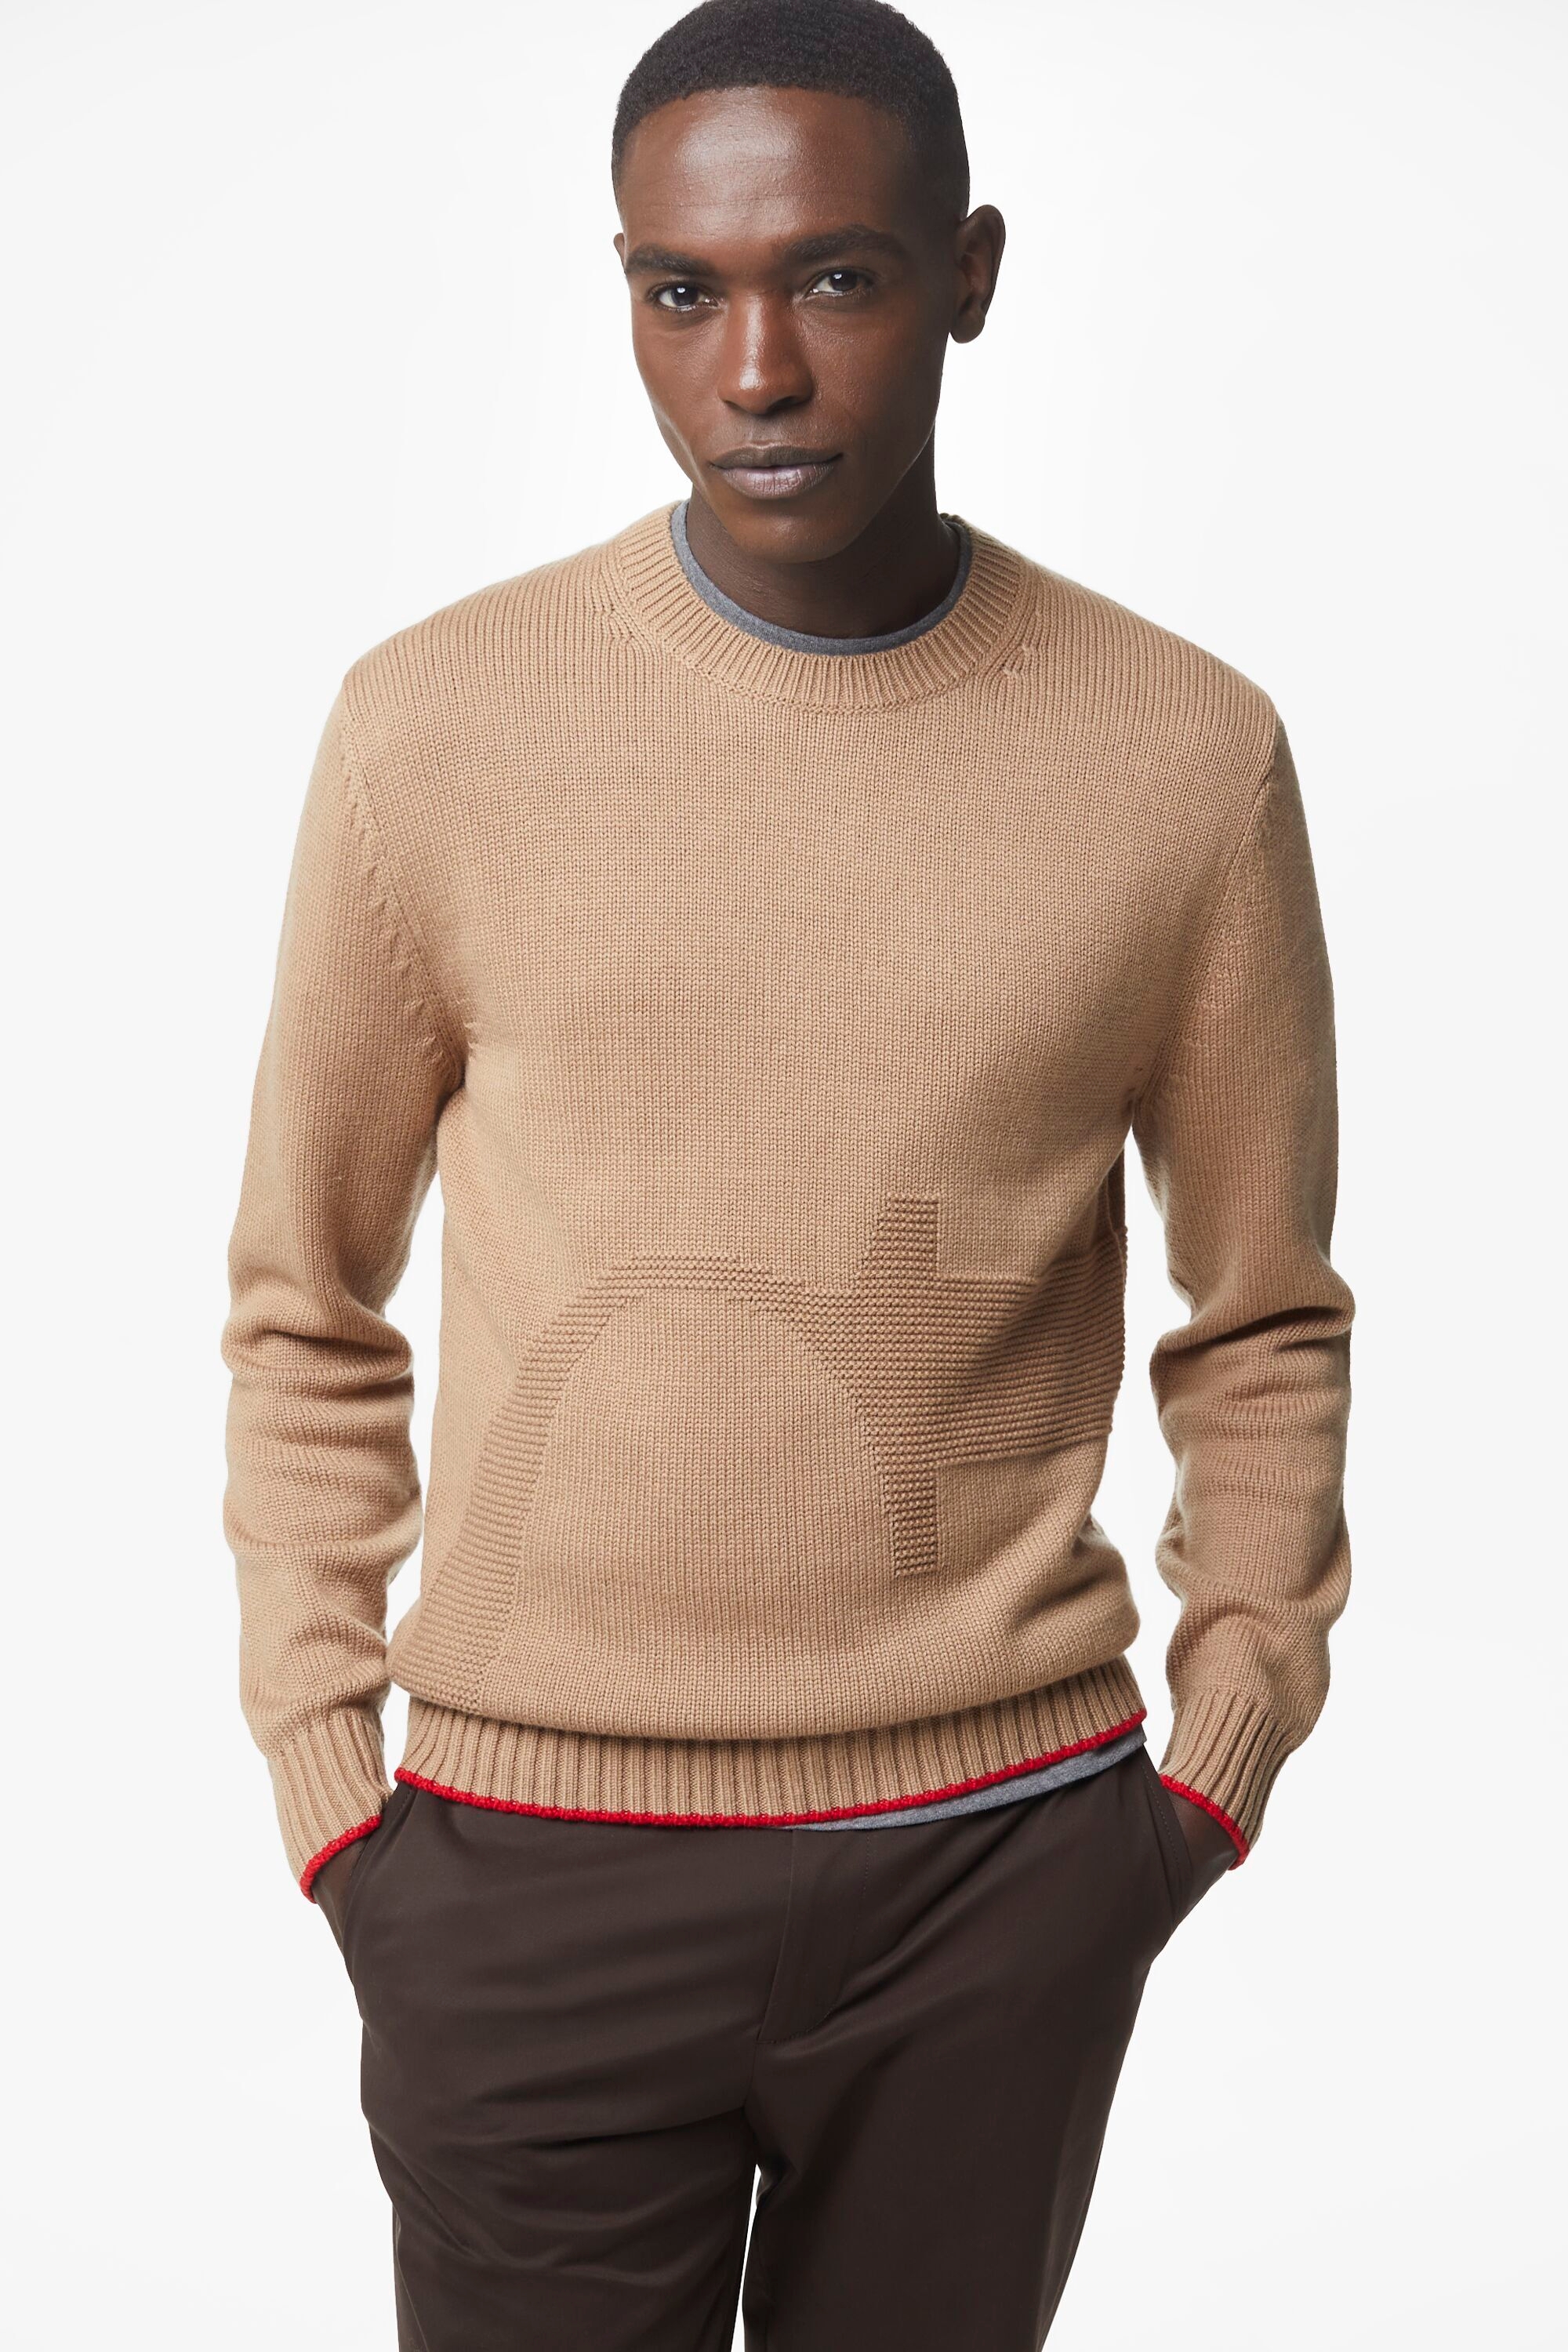 Doma Insignia wool and cashmere sweater